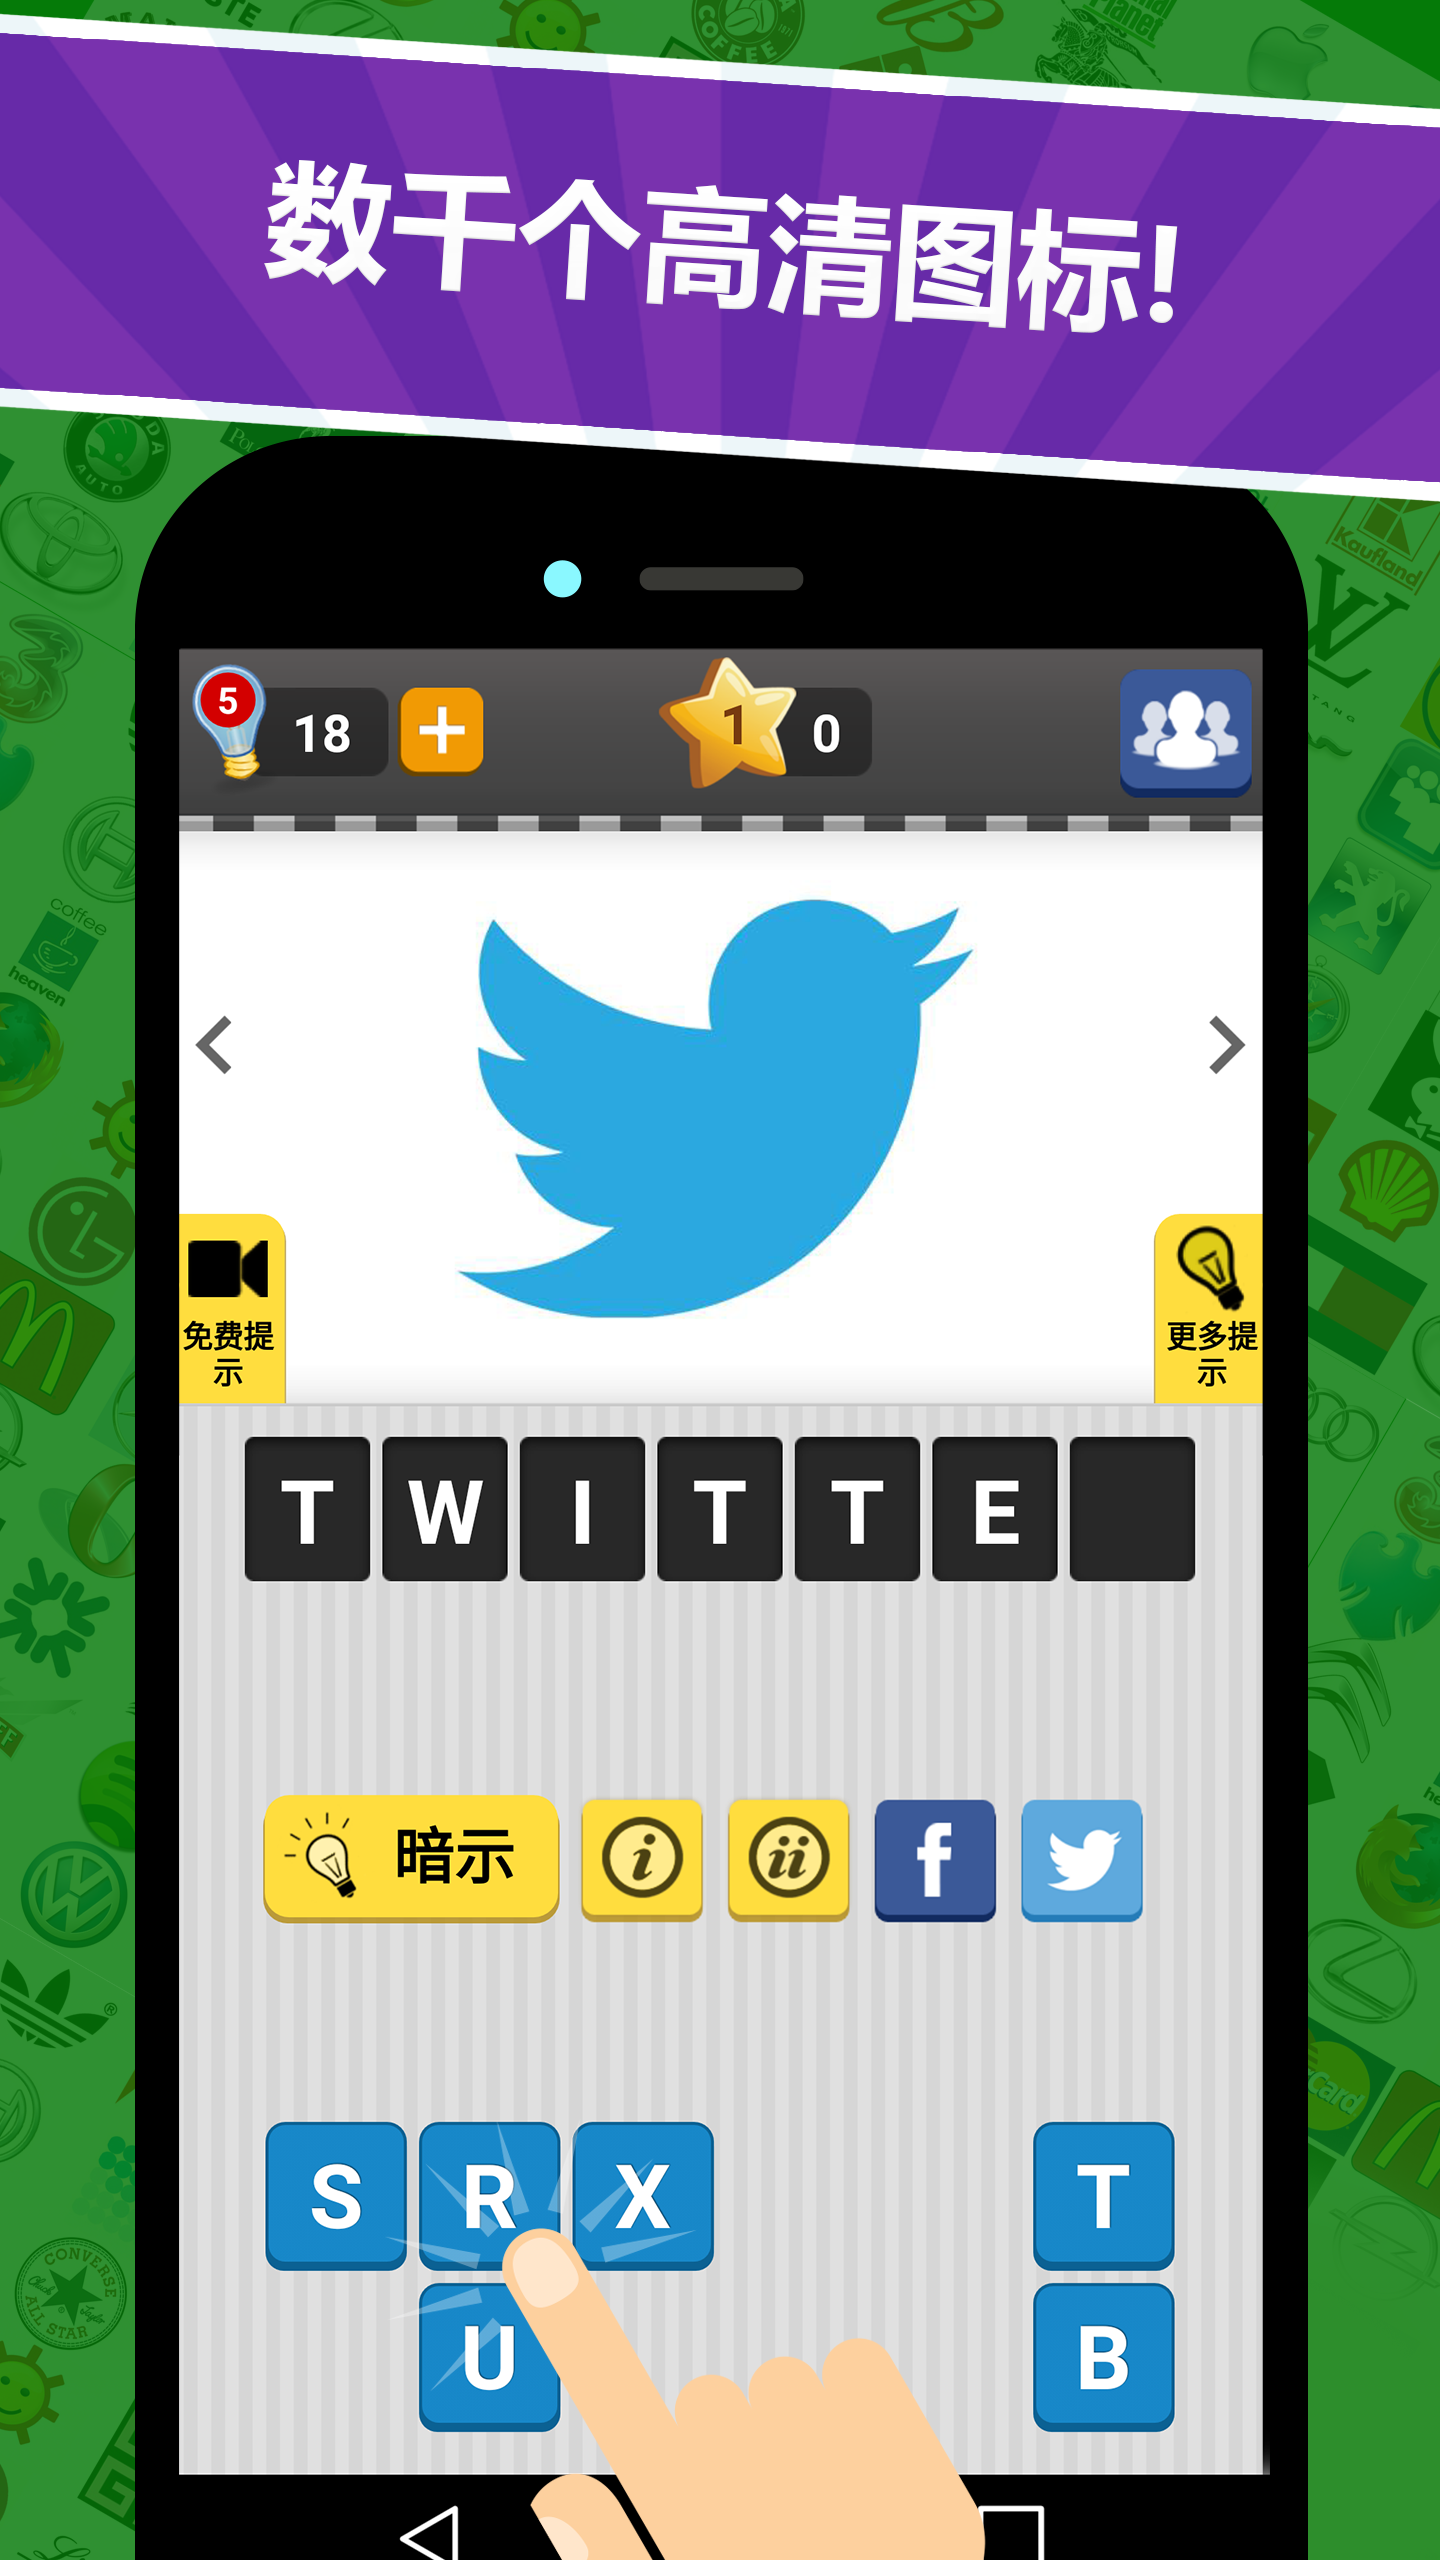 Android application Logo Game: Guess Brand Quiz screenshort